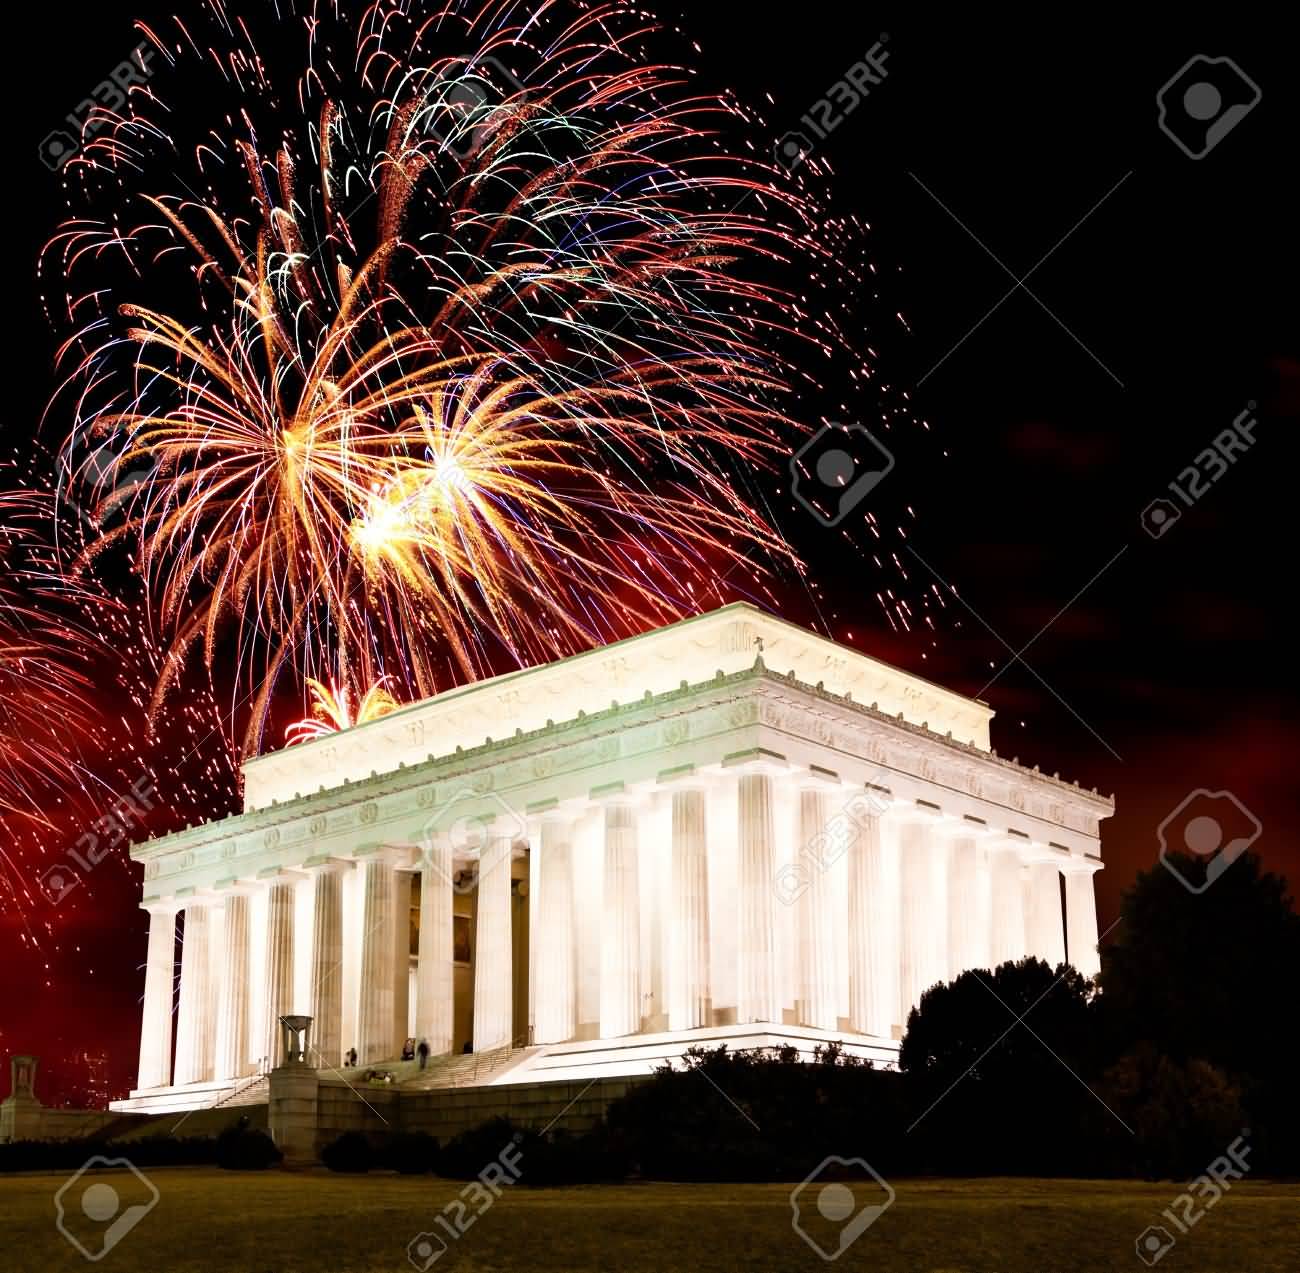 Fireworks Over The Lincoln Memorial In Washington DC